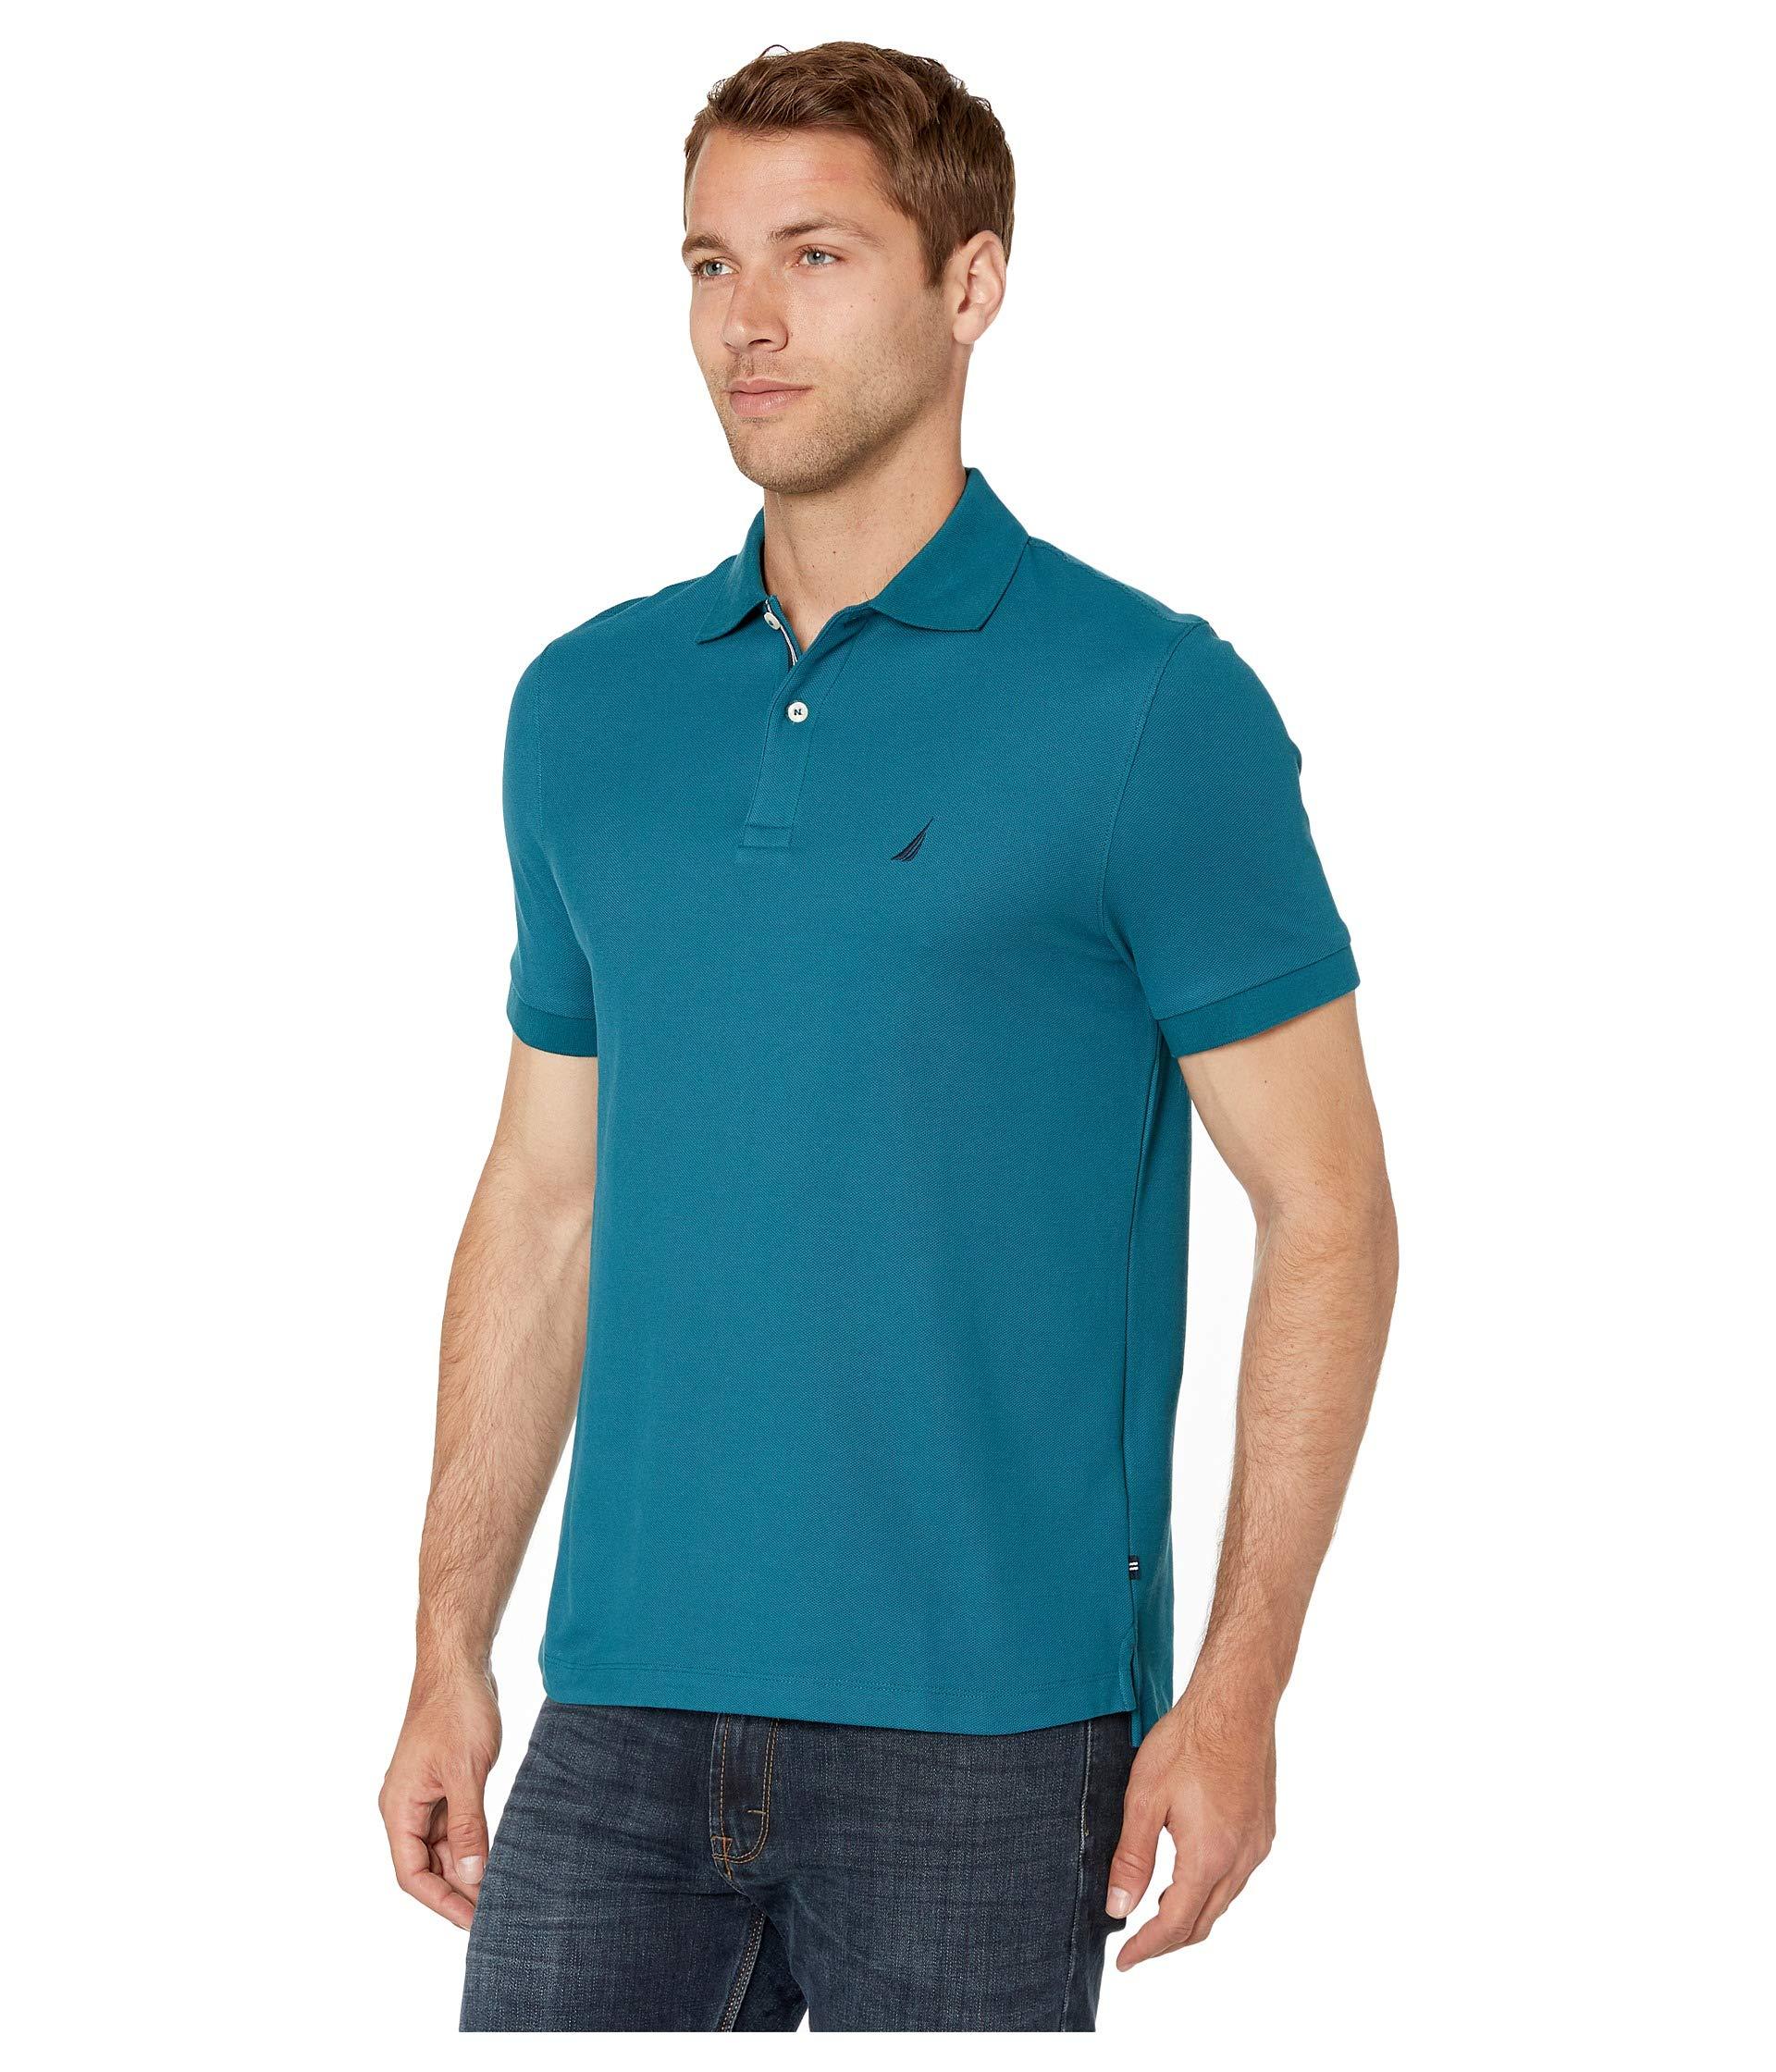 Nautica Cotton Solid Fca Deck Shirt in Blue for Men - Lyst